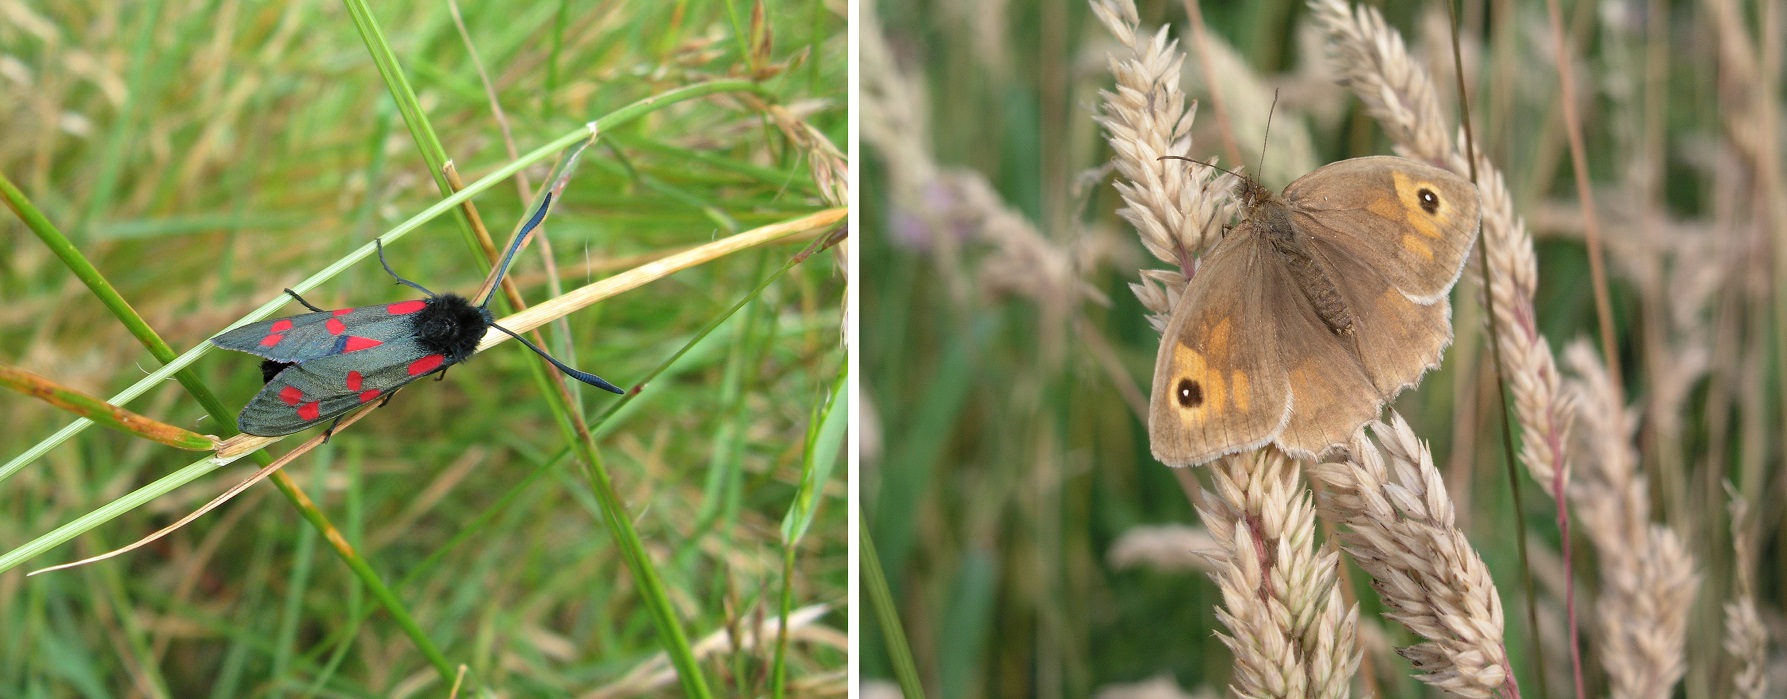 The 6-Spot Burnet Moth and the Ringlet Butterfly